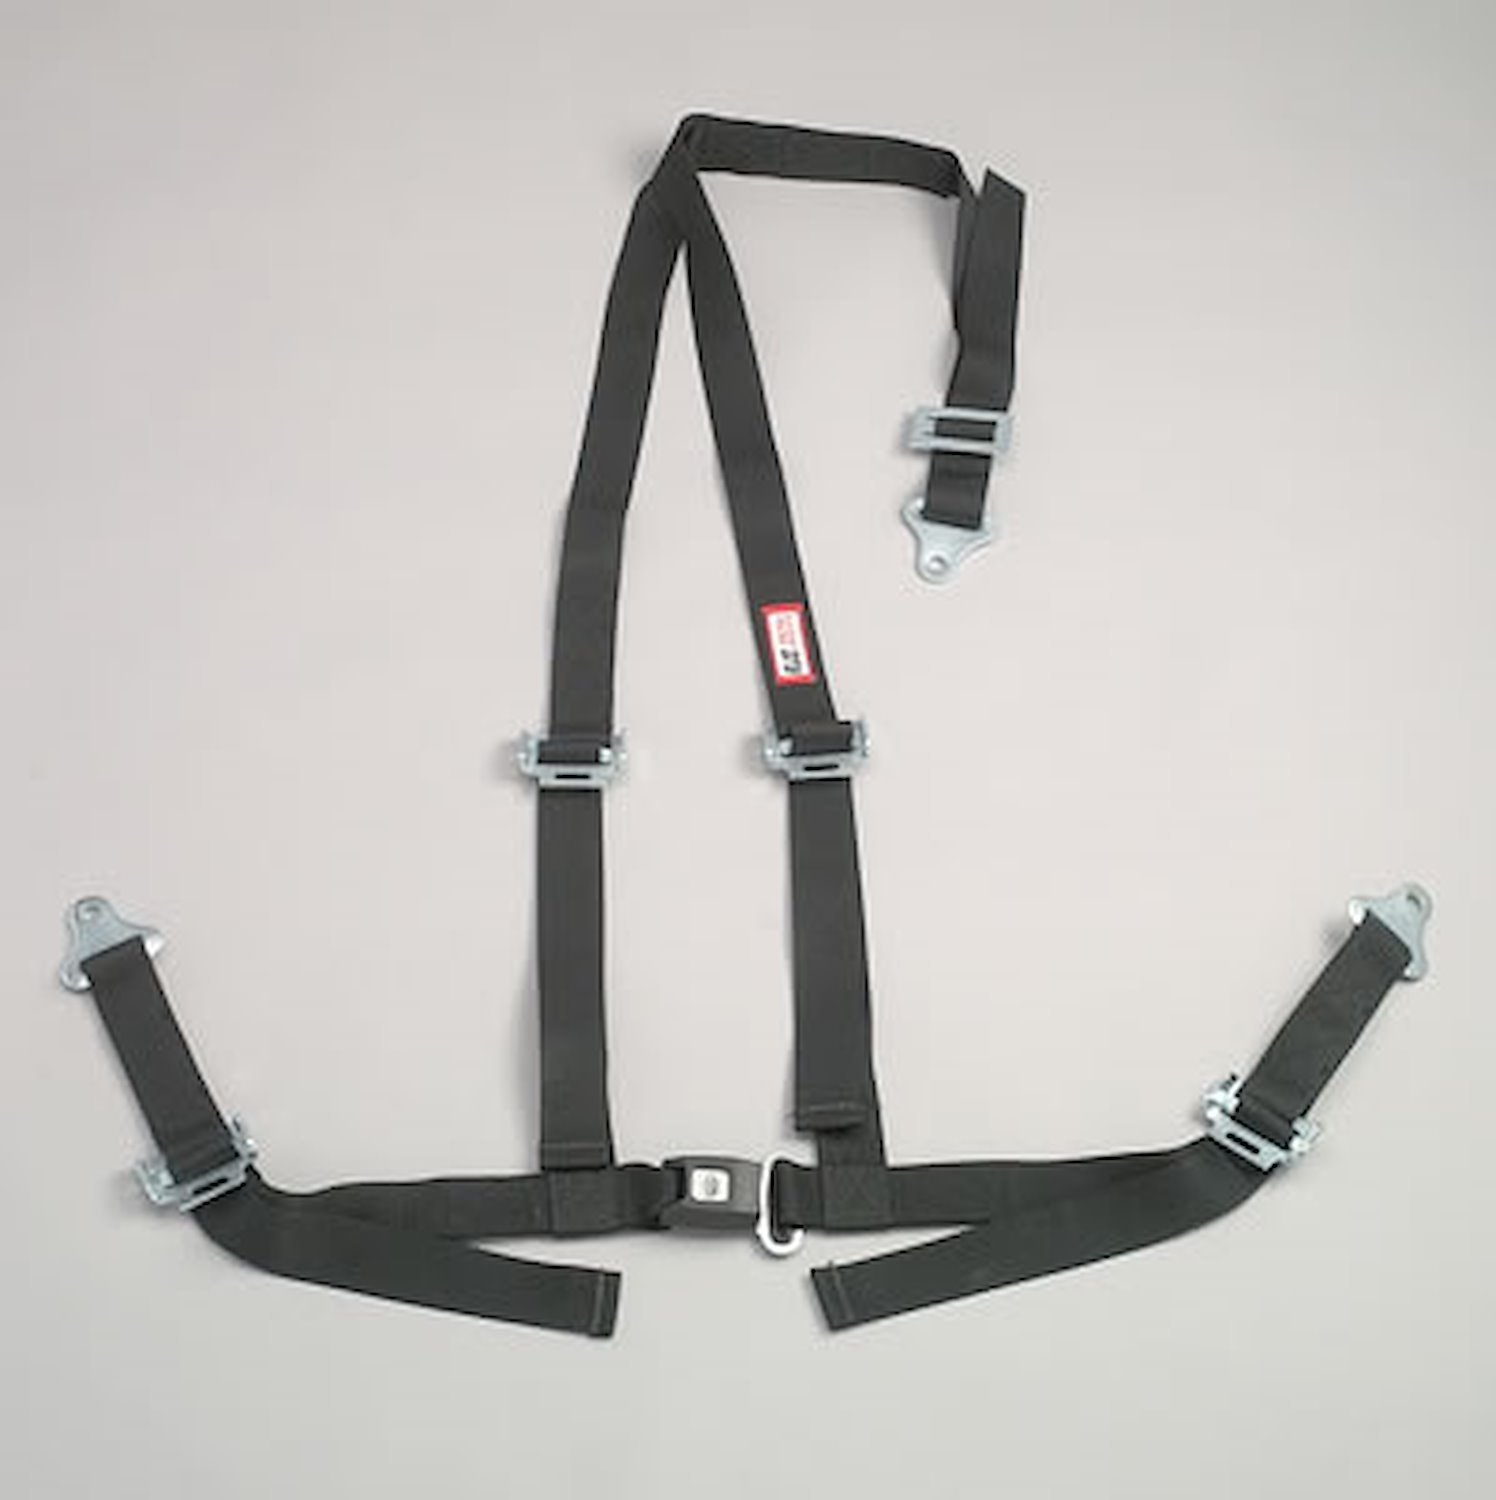 NON-SFI B&T HARNESS 2 PULL UP Lap Belt SNAP 2 S. H. Y FLOOR Mount WRAP/SNAP w/STERNUM STRAP YELLOW